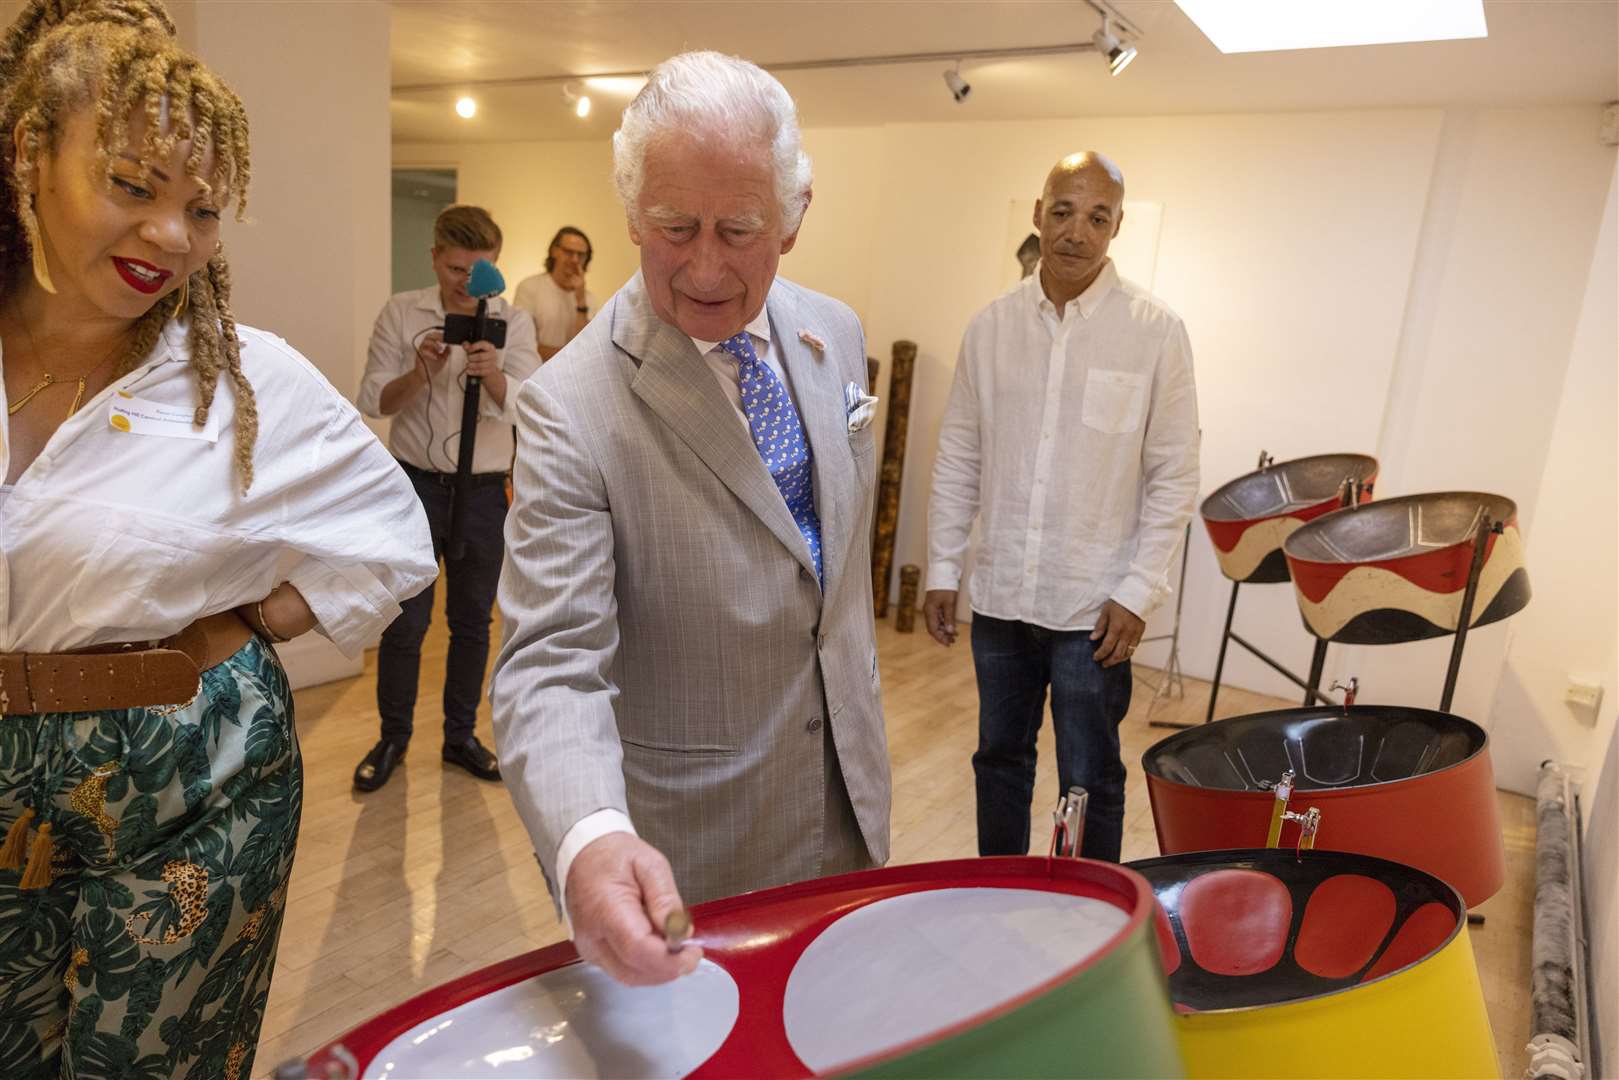 The Prince of Wales could not resist trying to play a steel pan (Ian Vogler/Daily Mirror/PA)